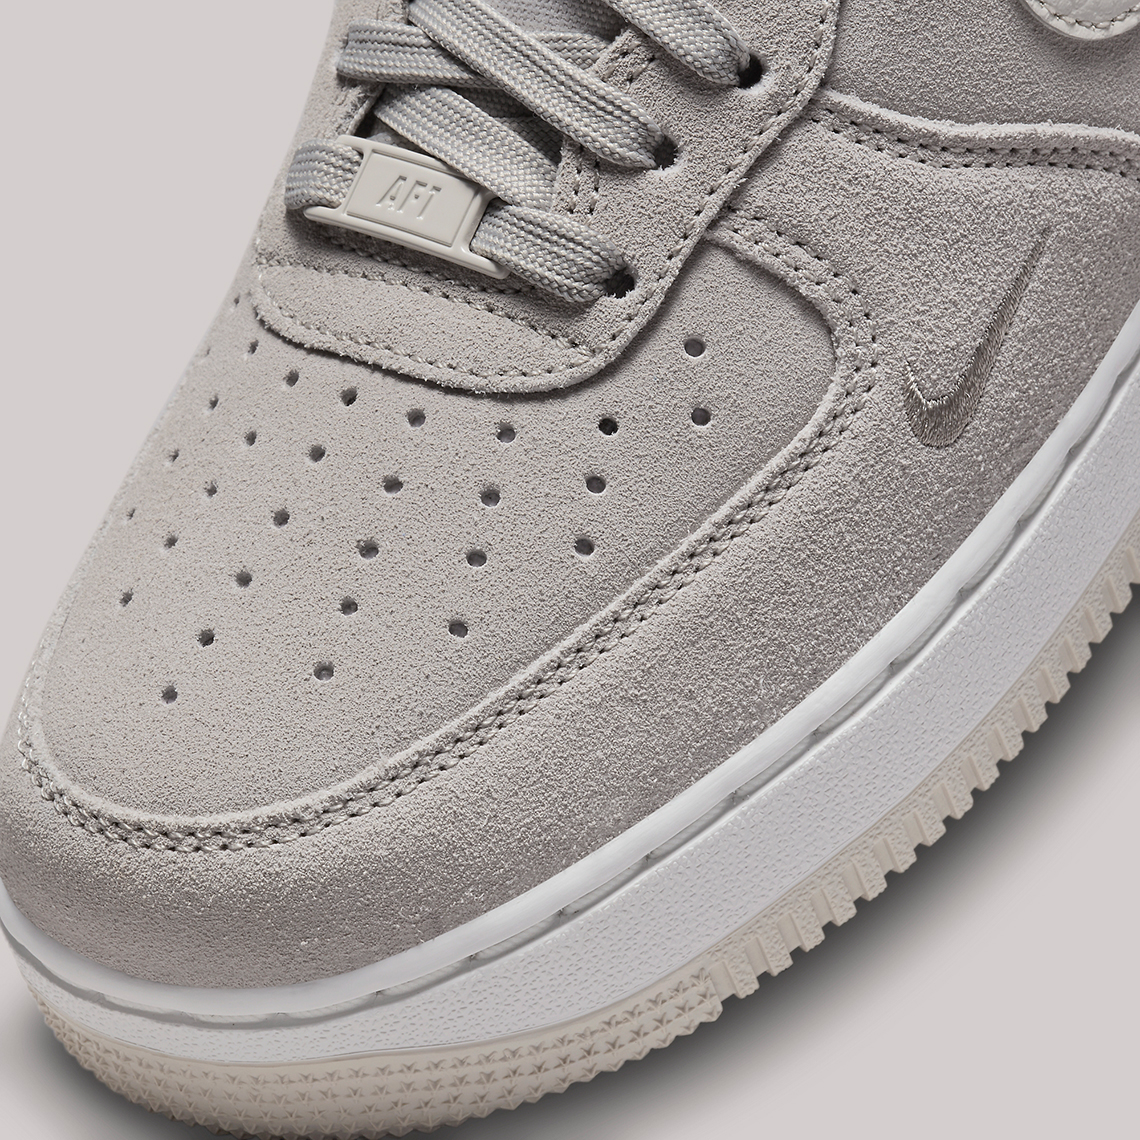 suede wolf grey air force 1